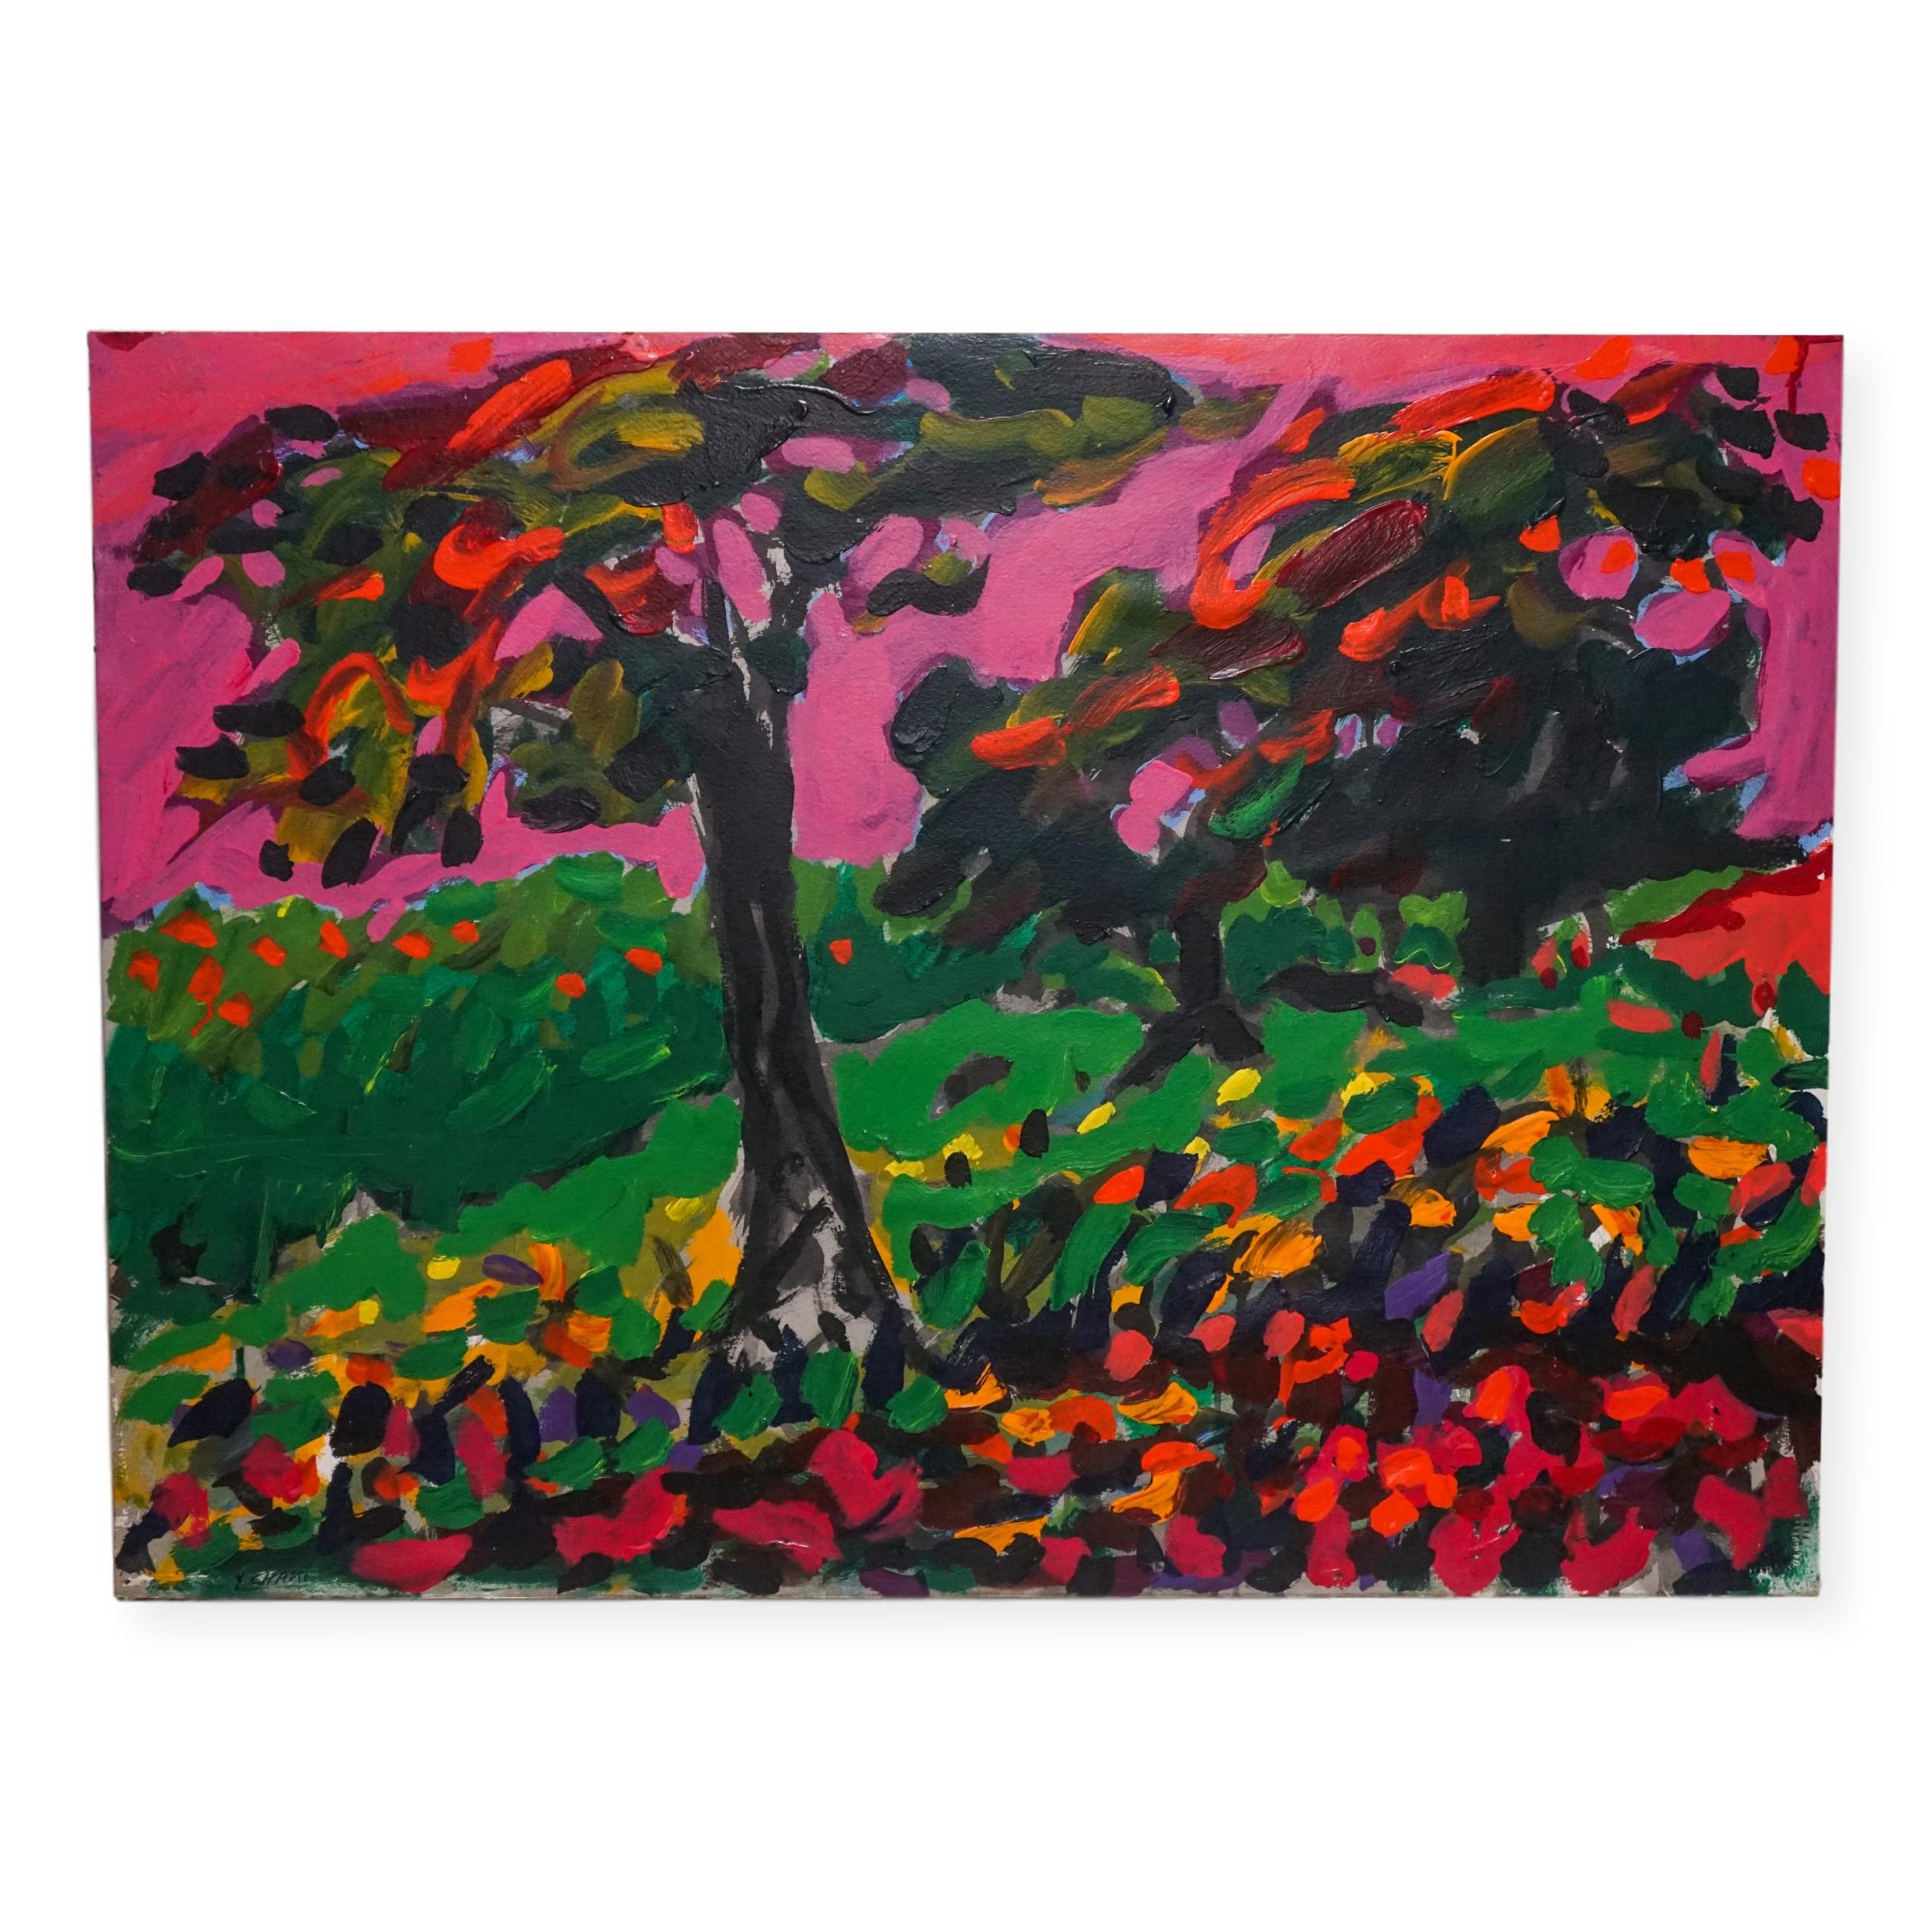 Fauvist Post Impressionist French Canadian Landscape